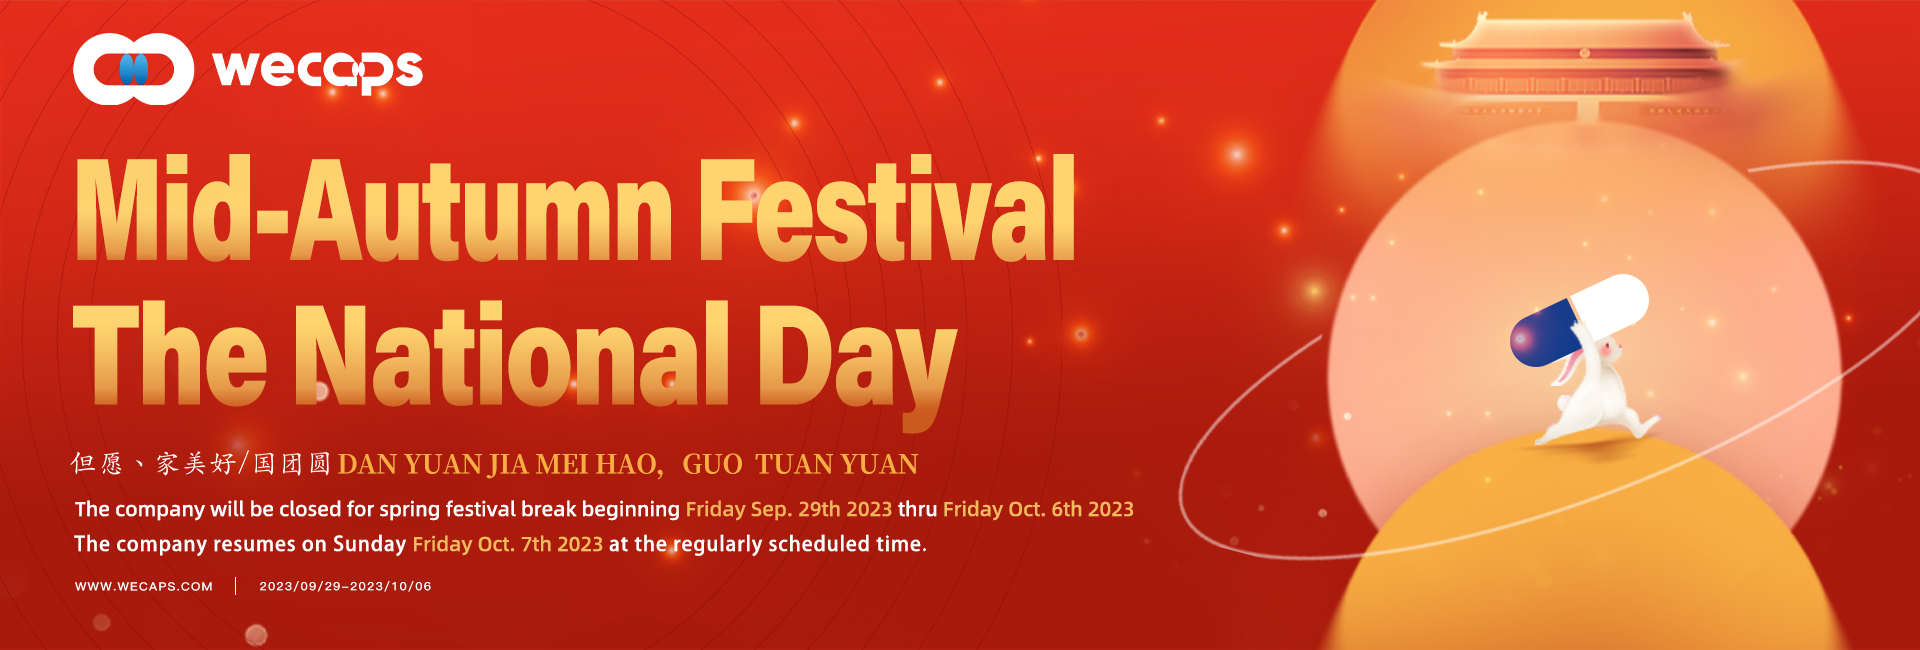 Double Celebration: Mid-Autumn Festival & Chinese National Day